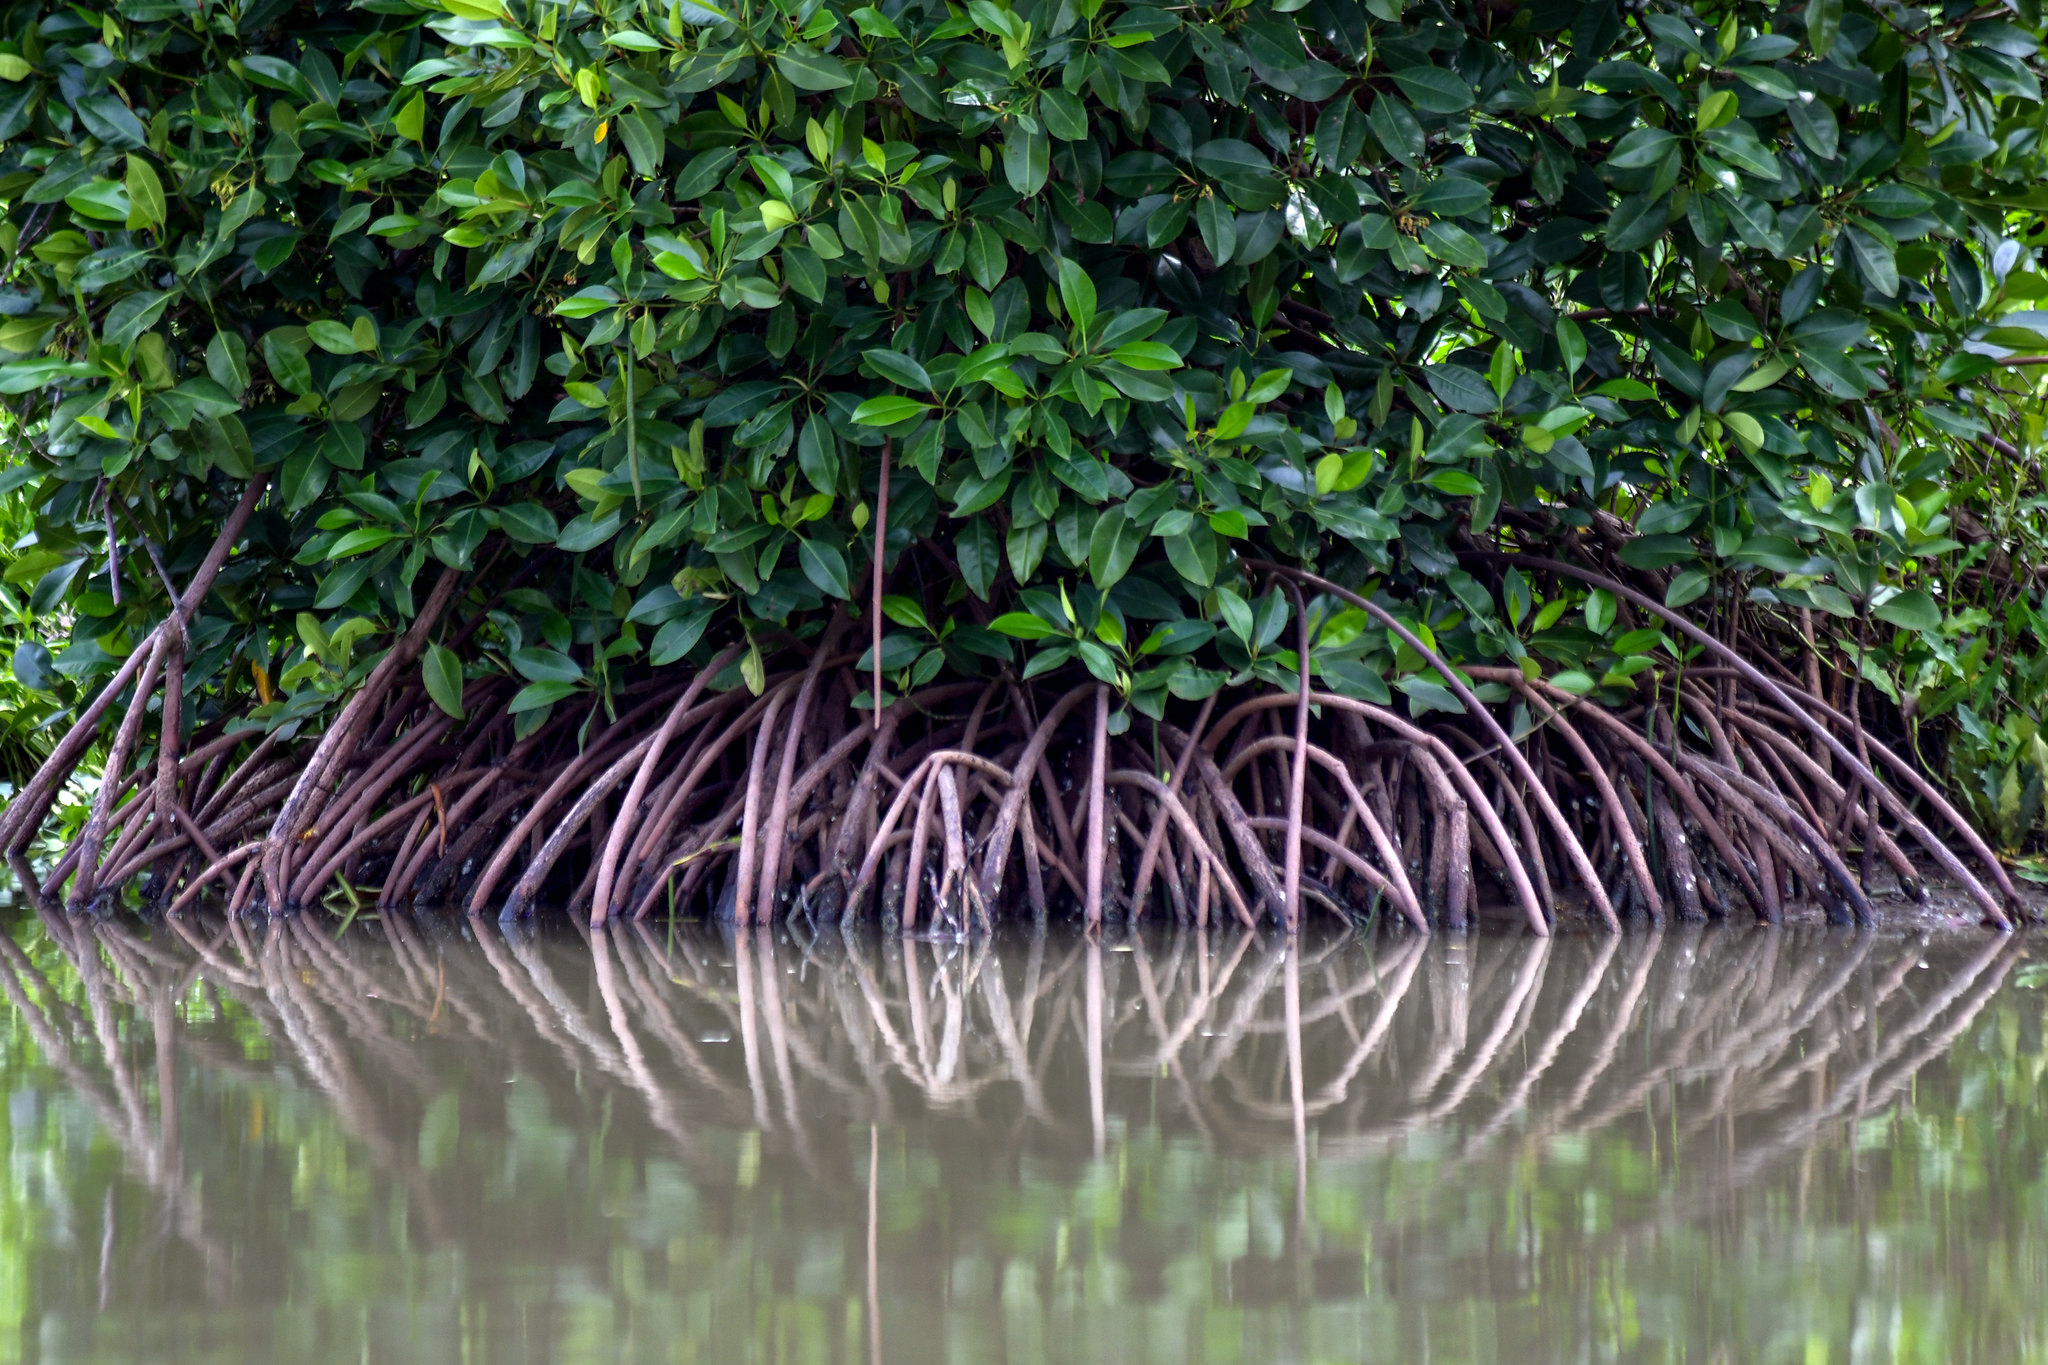 Establish Centre of Excellence for research on mangroves and marine ecosystems